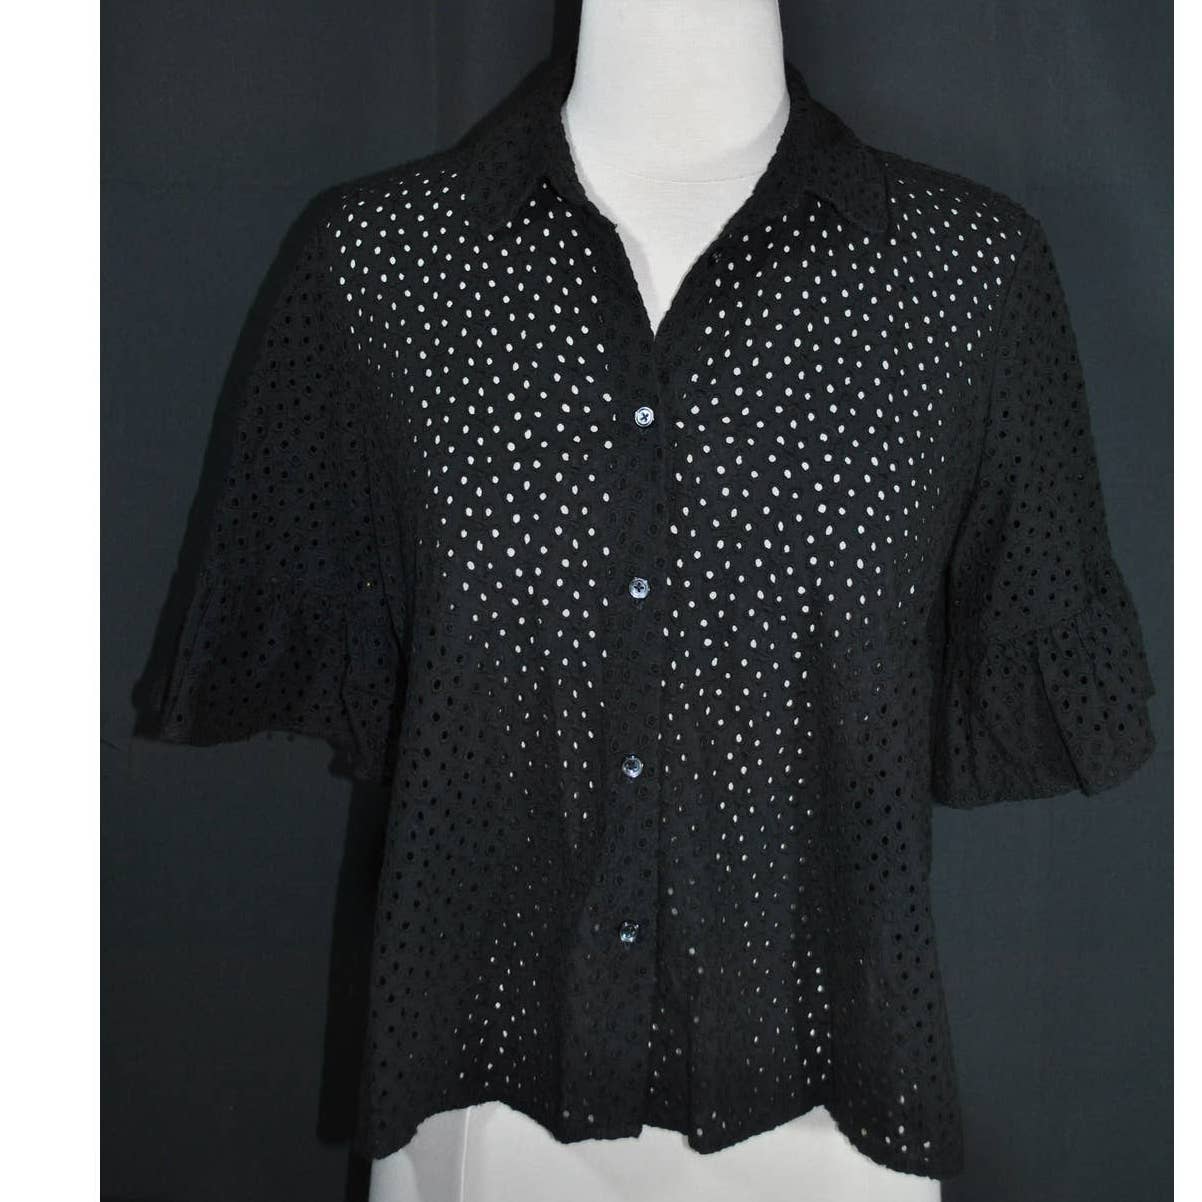 Madewell Black Eyelet Button Up Short Sleeve Top - S